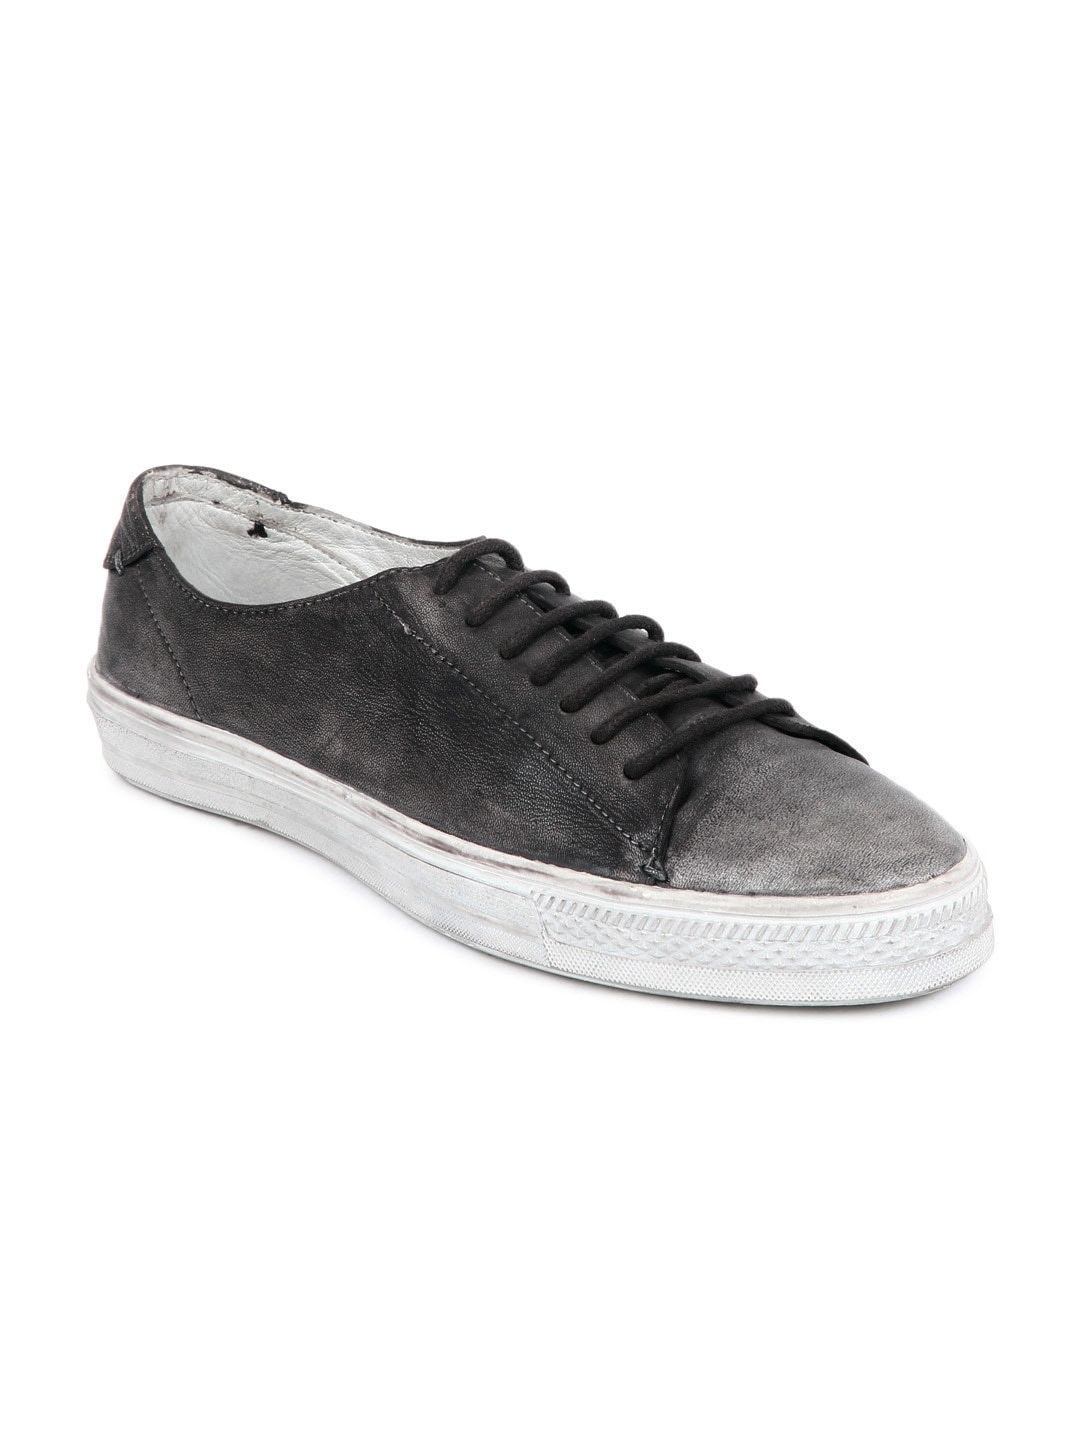 Playboy Men Grey High Cut Lace Up Casual Shoes